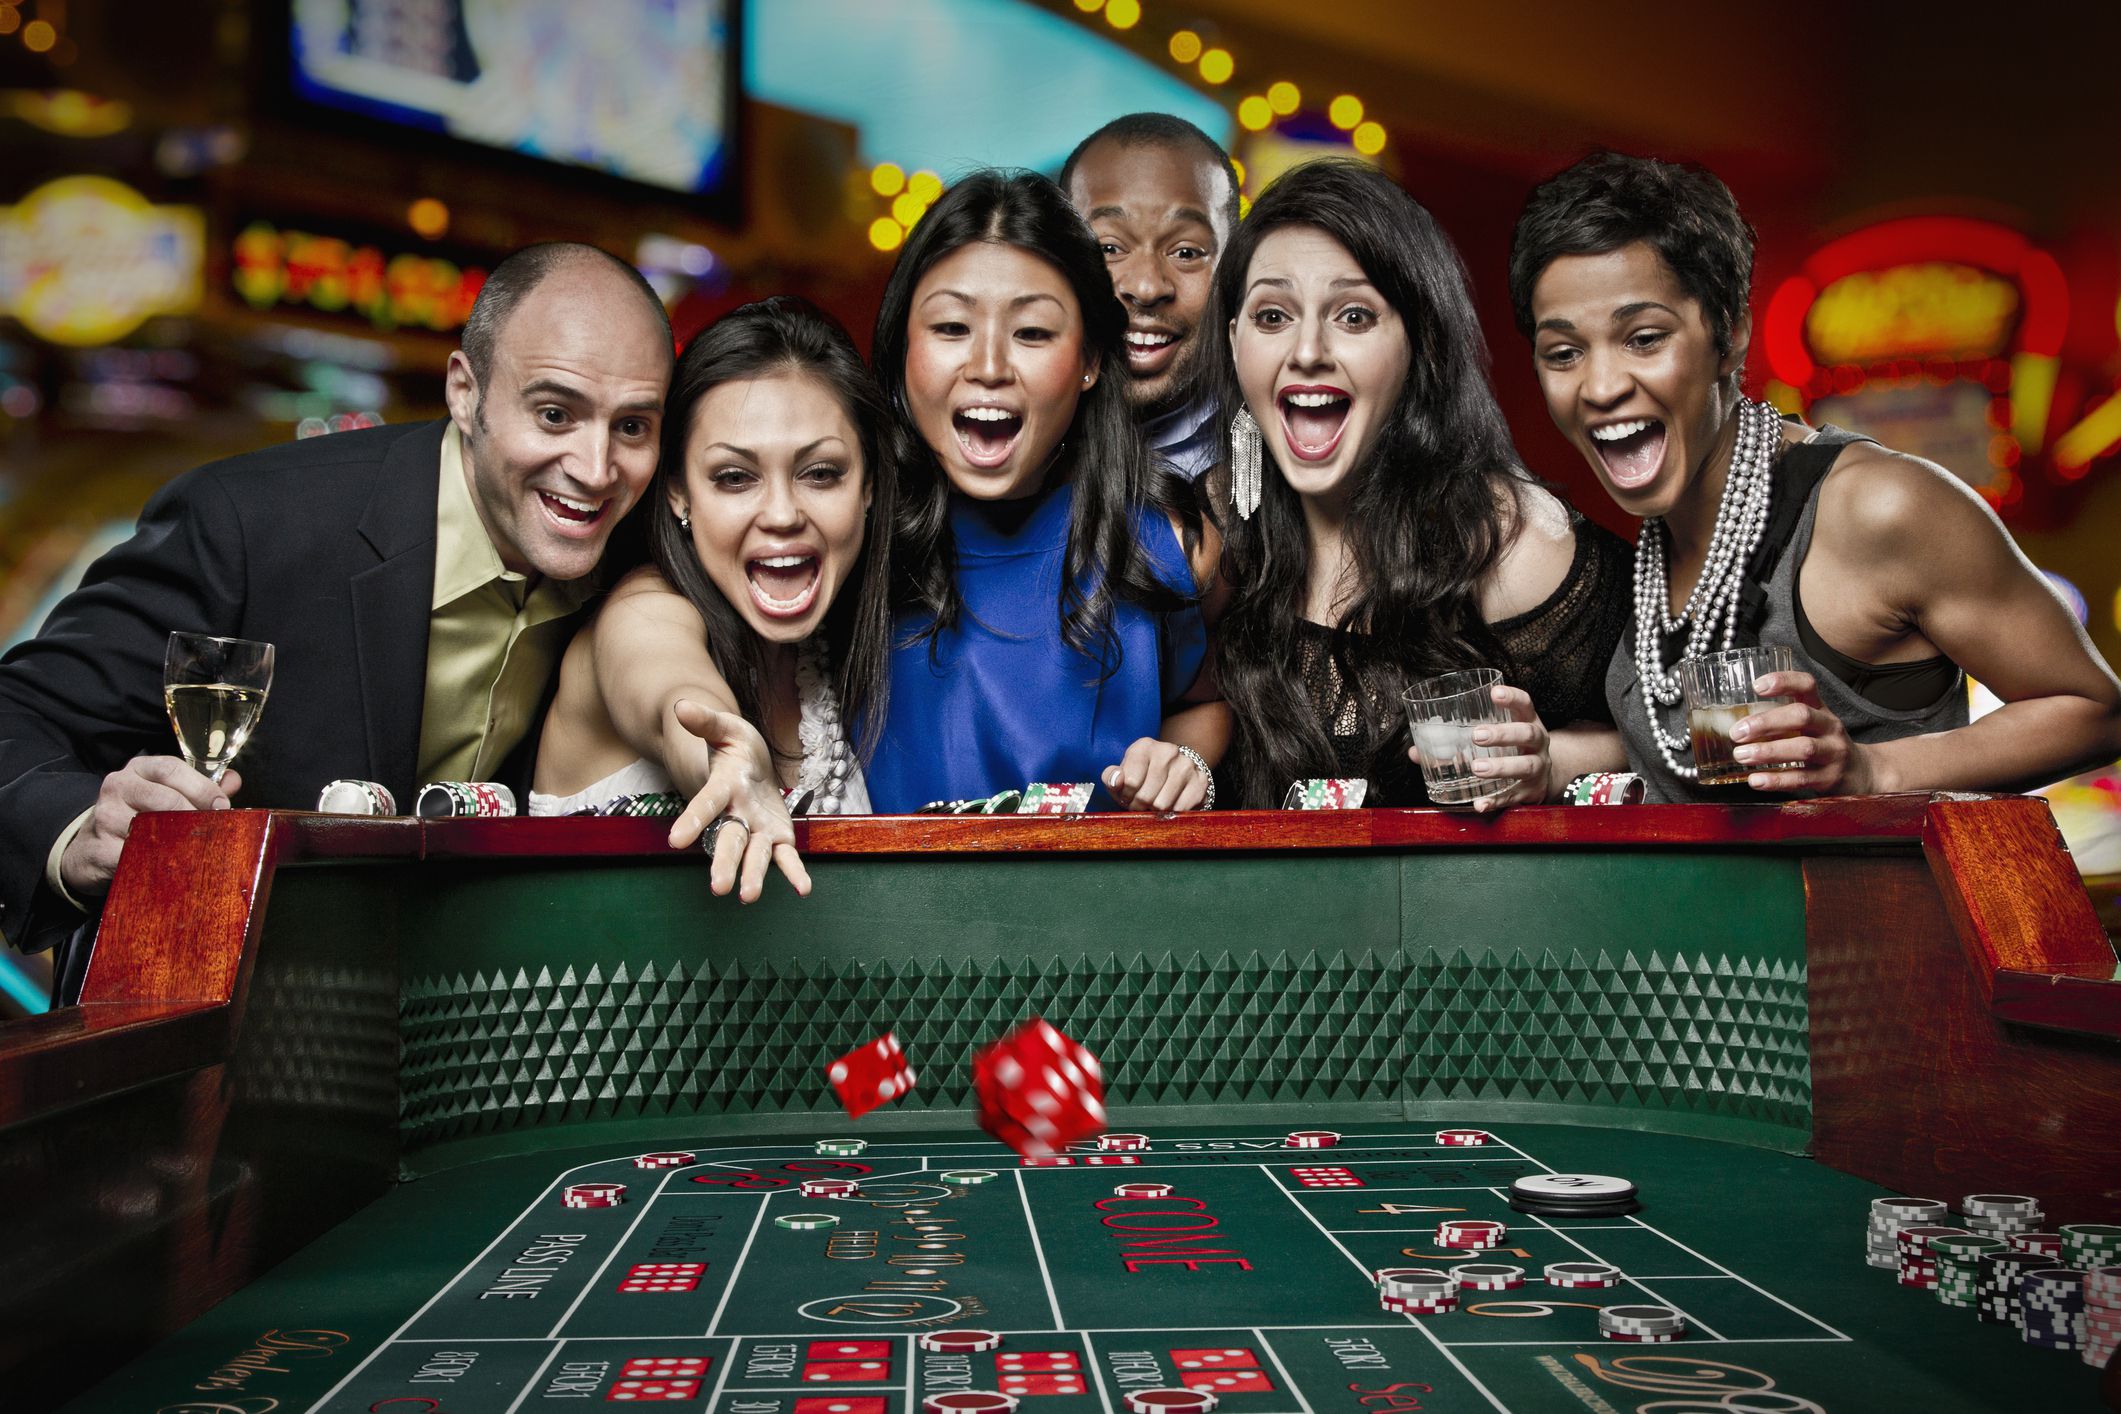 Benefits experienced while playing with online casino games